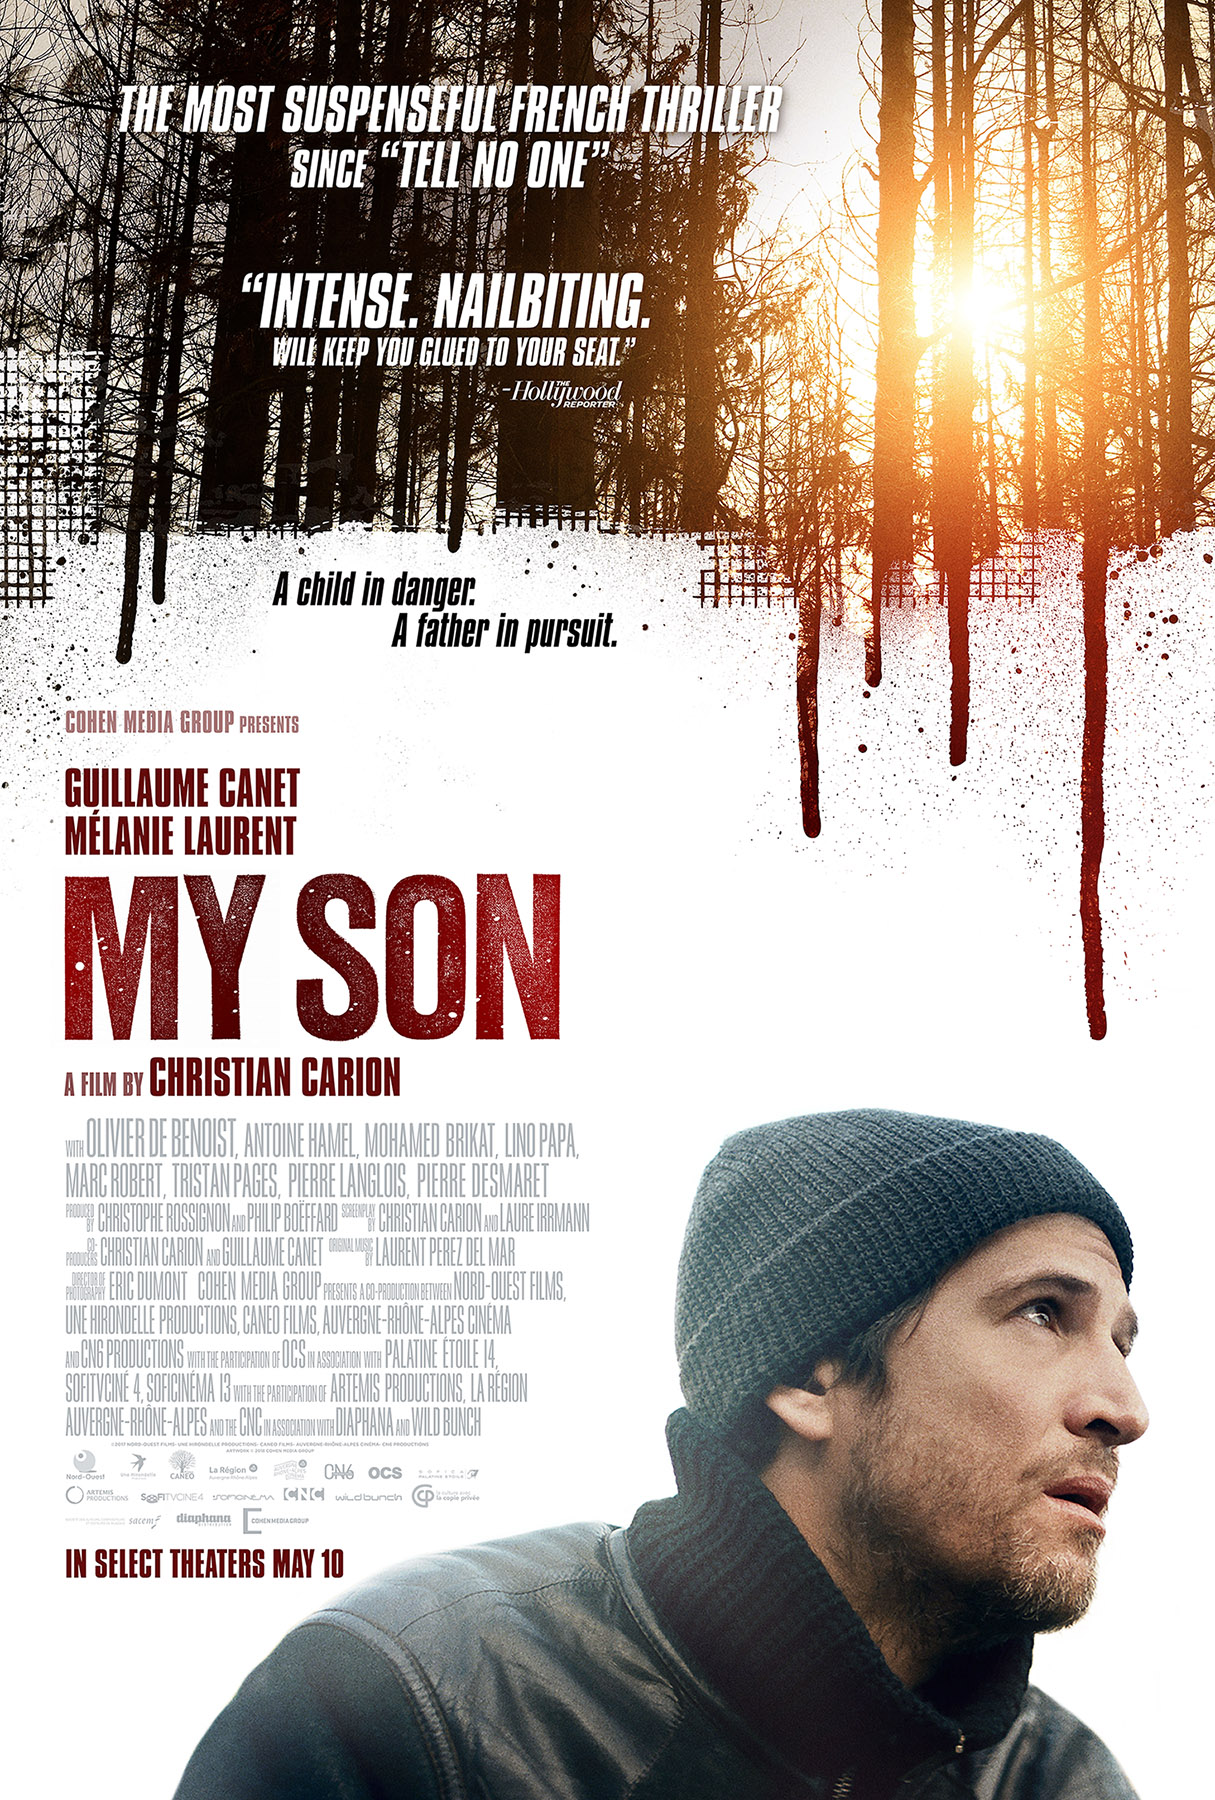 My Son is a 2021 mystery thriller film written and directed by Christian Carion. It is an English-language remake of his 2017 French film Mon garçon 